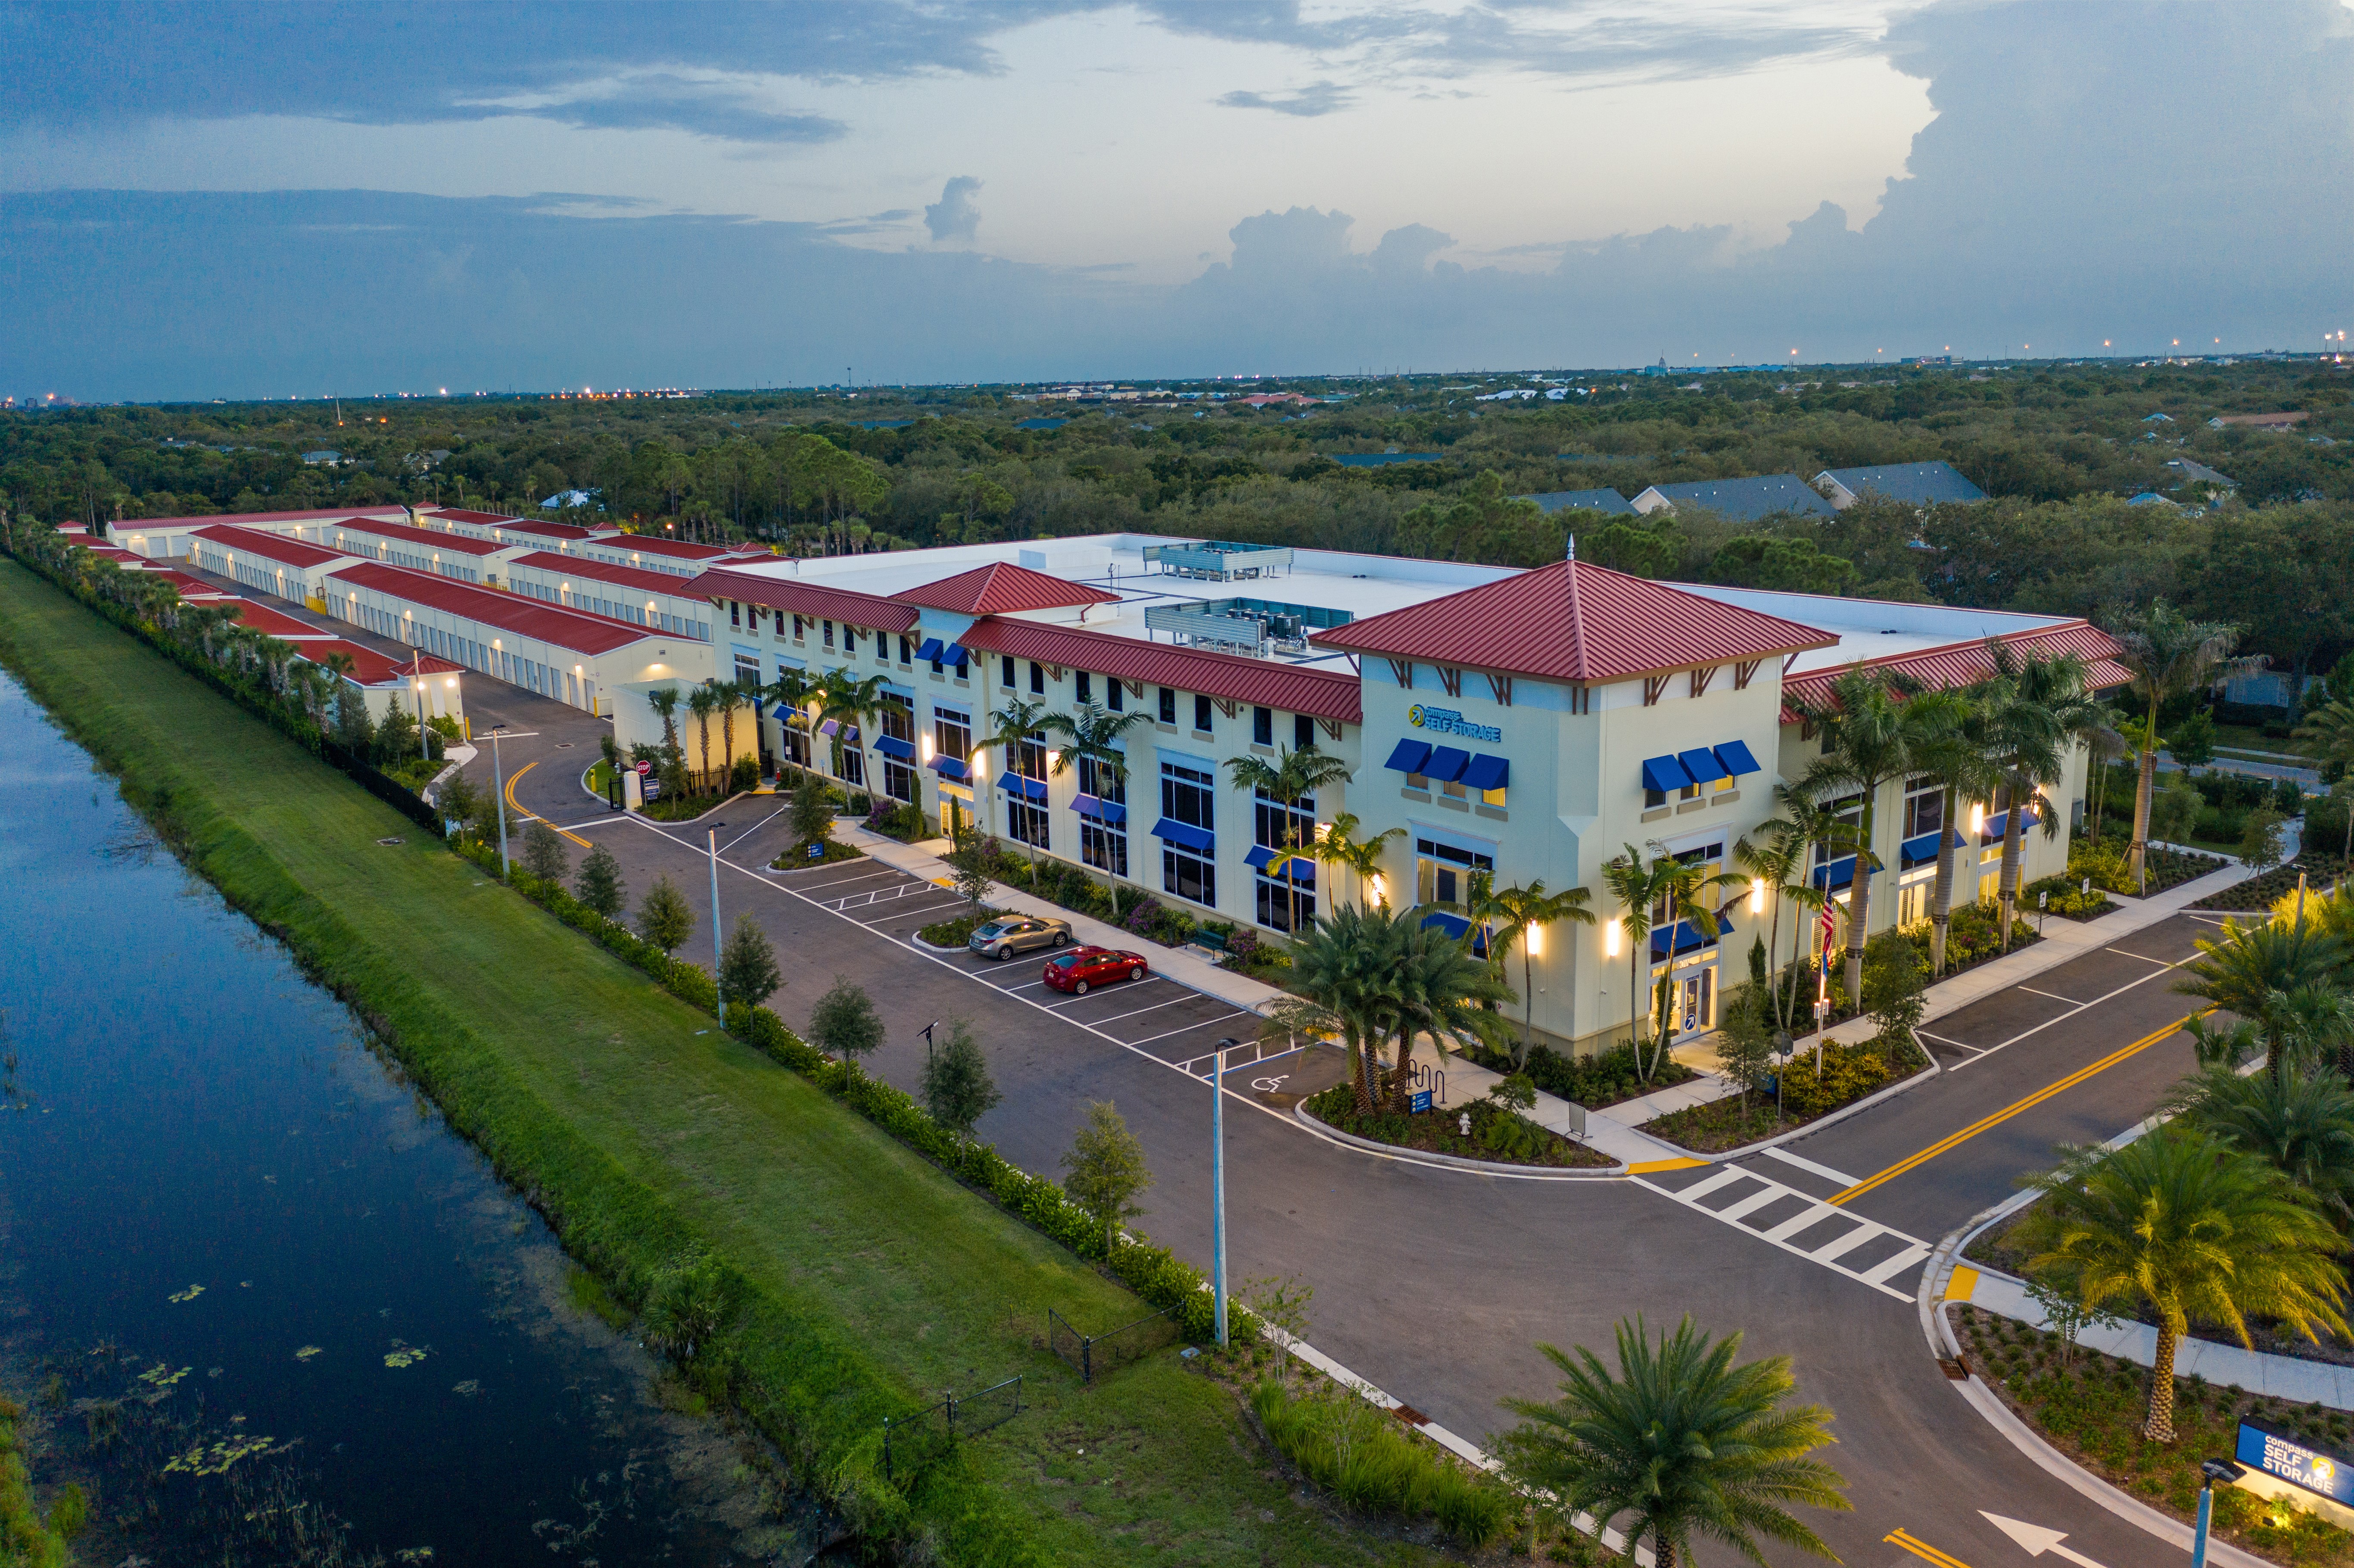 Compass Self Storage in Jupiter, Florida offers self storage and a brand new, state-of-the-art wine storage cellar